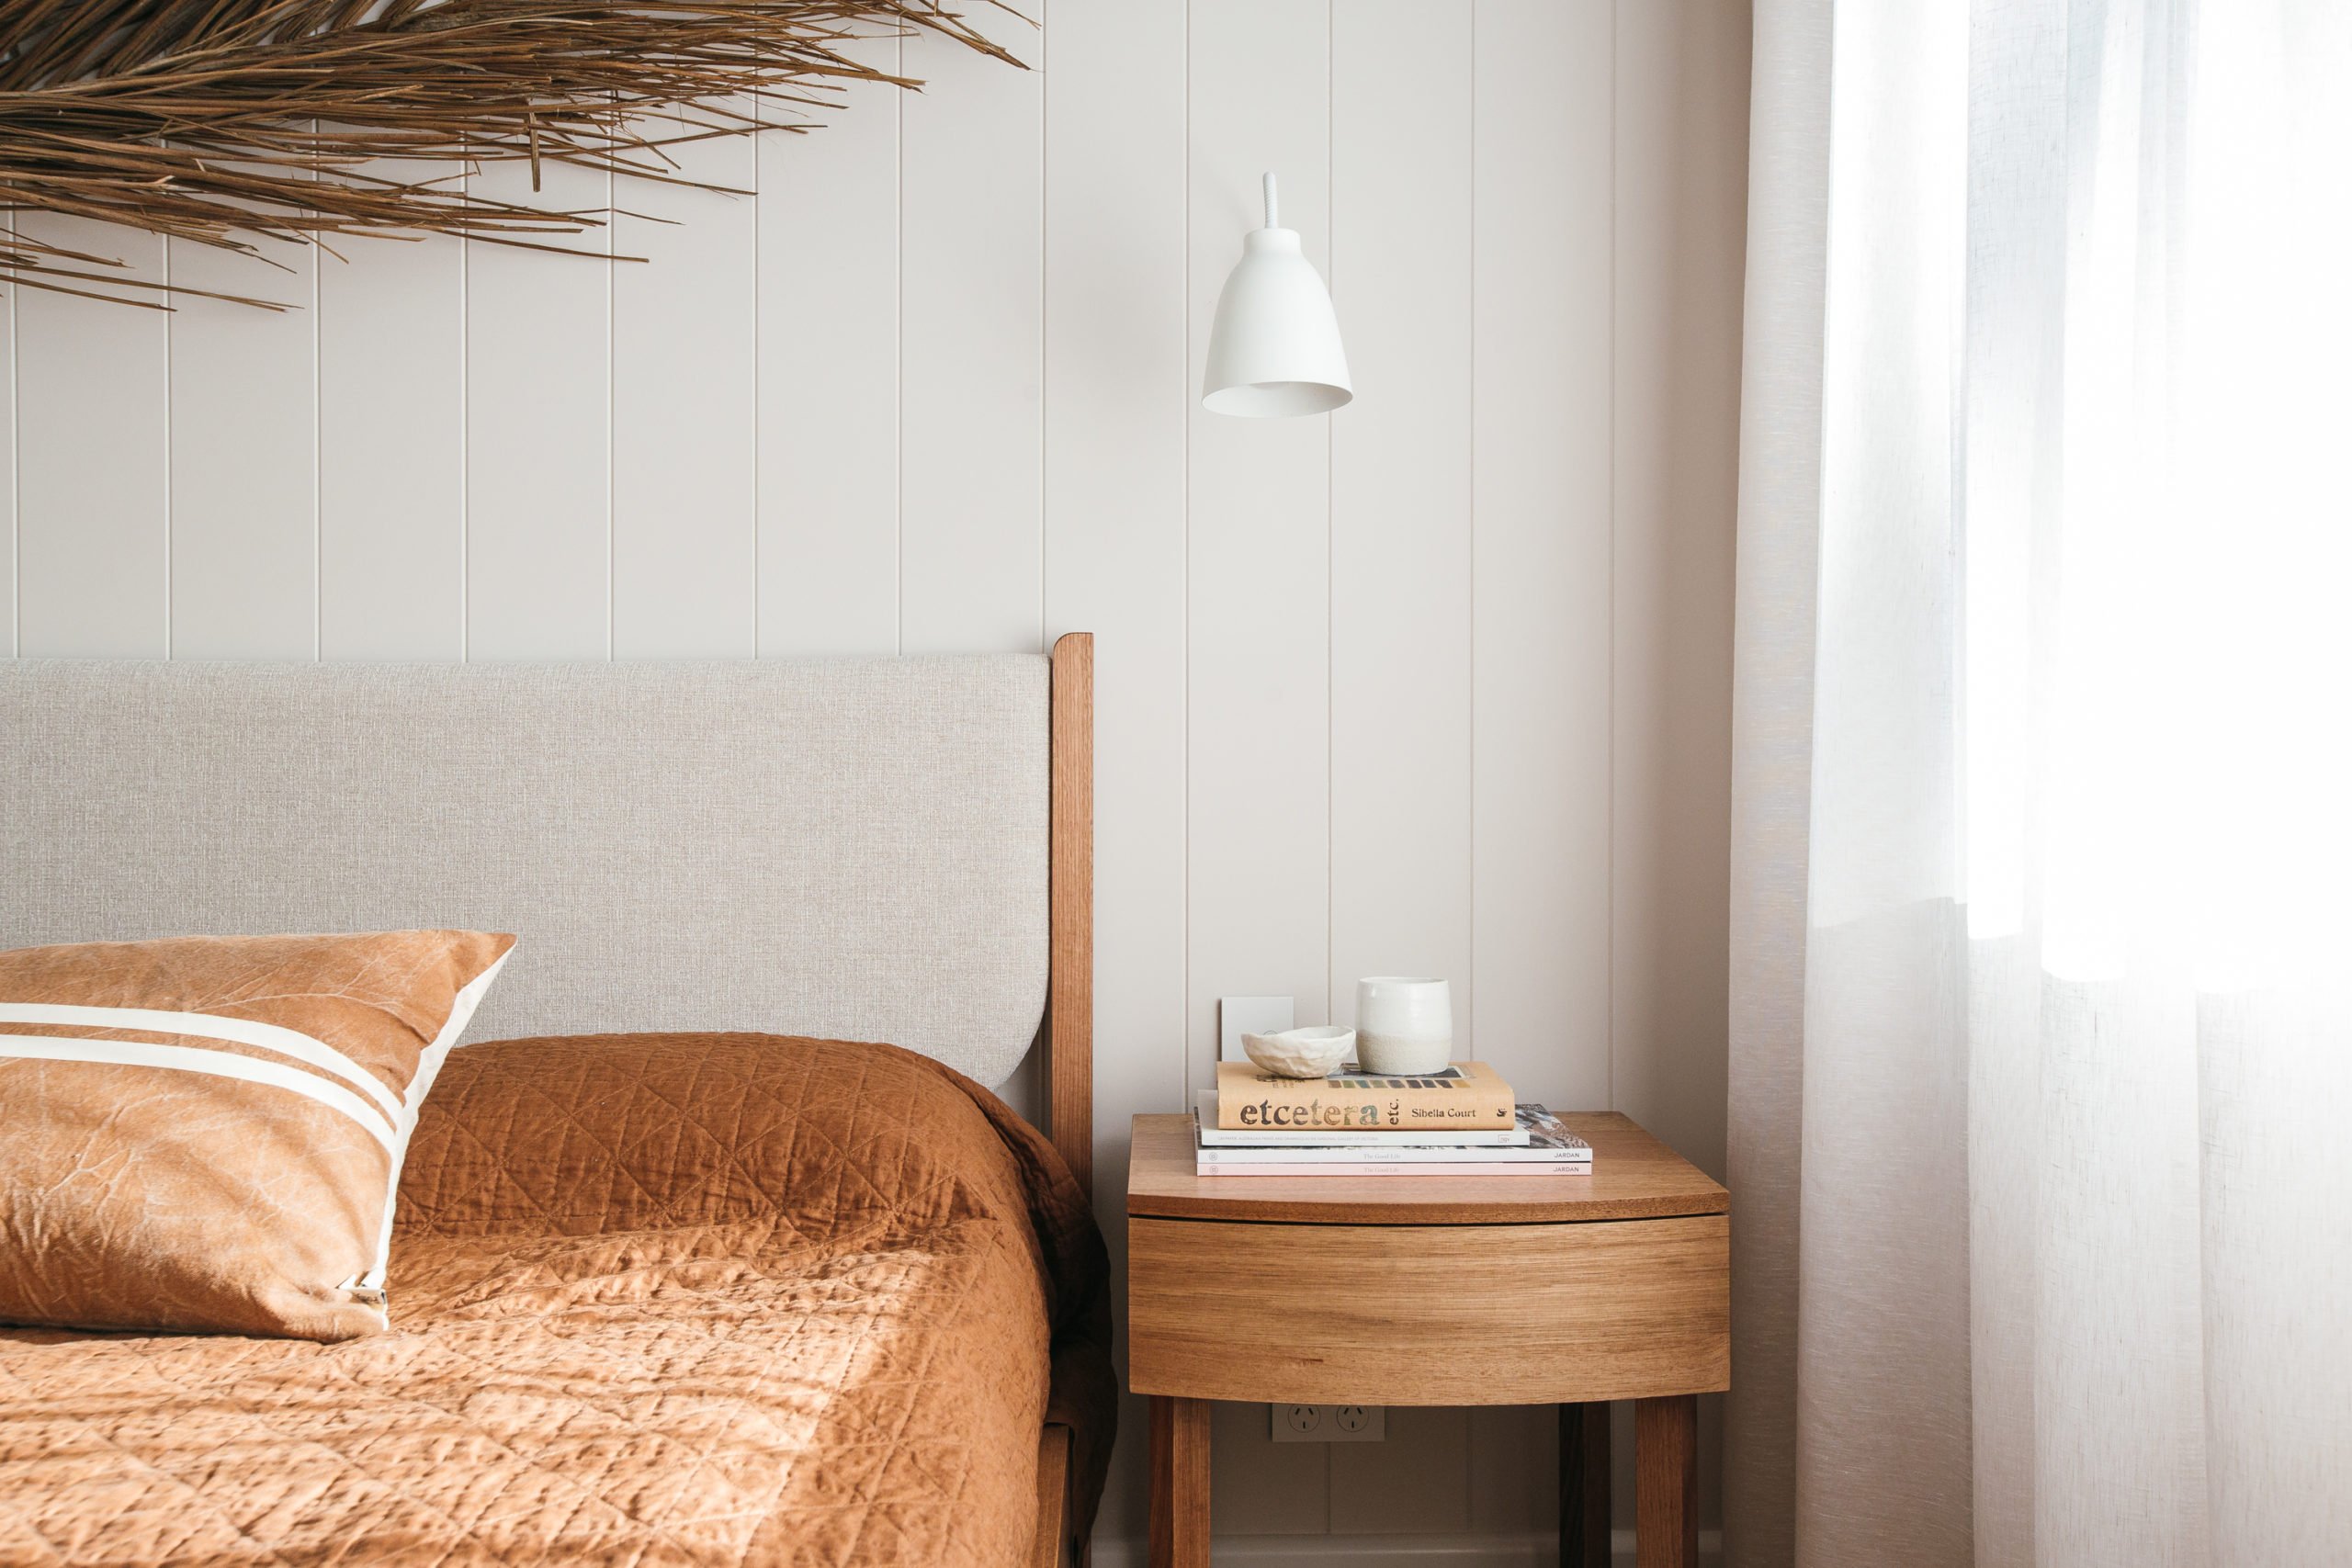 Plyco's EasyVJ100 wall panelling used in a modern, rustic bedroom